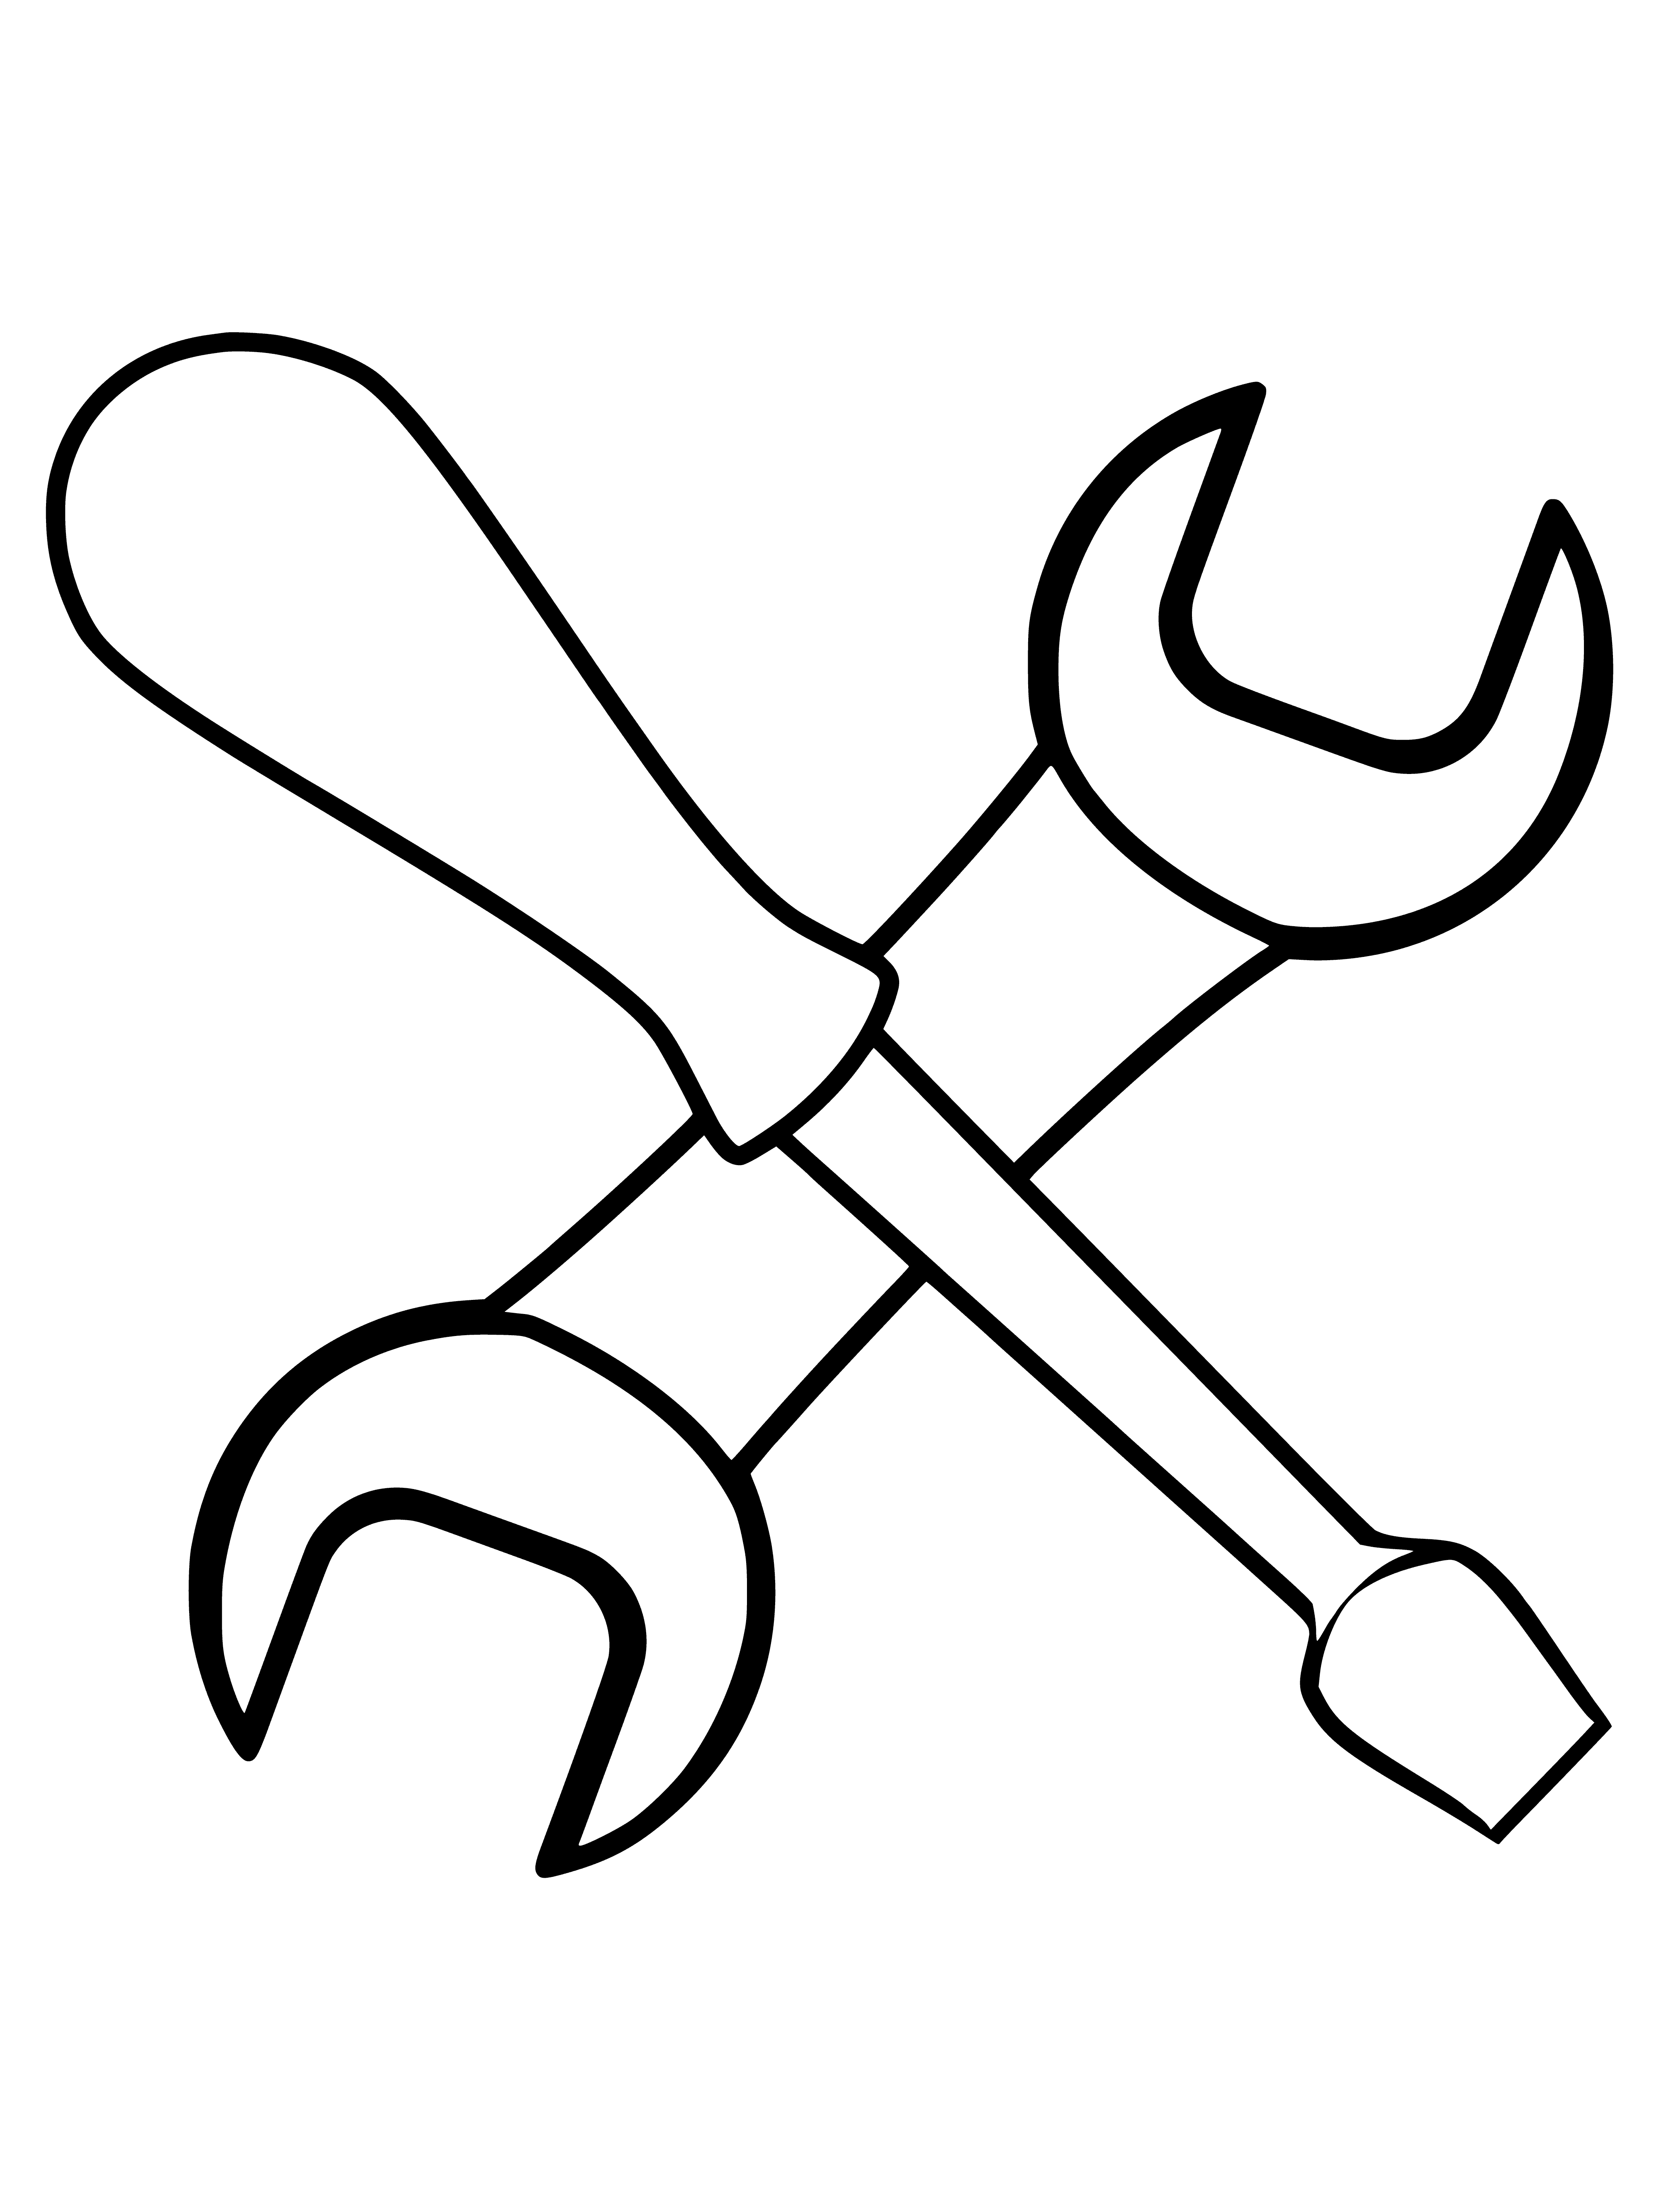 coloring page: Silver wrench & black screwdriver on white surface; wrench angled, screwdriver upright; both have metal tips.